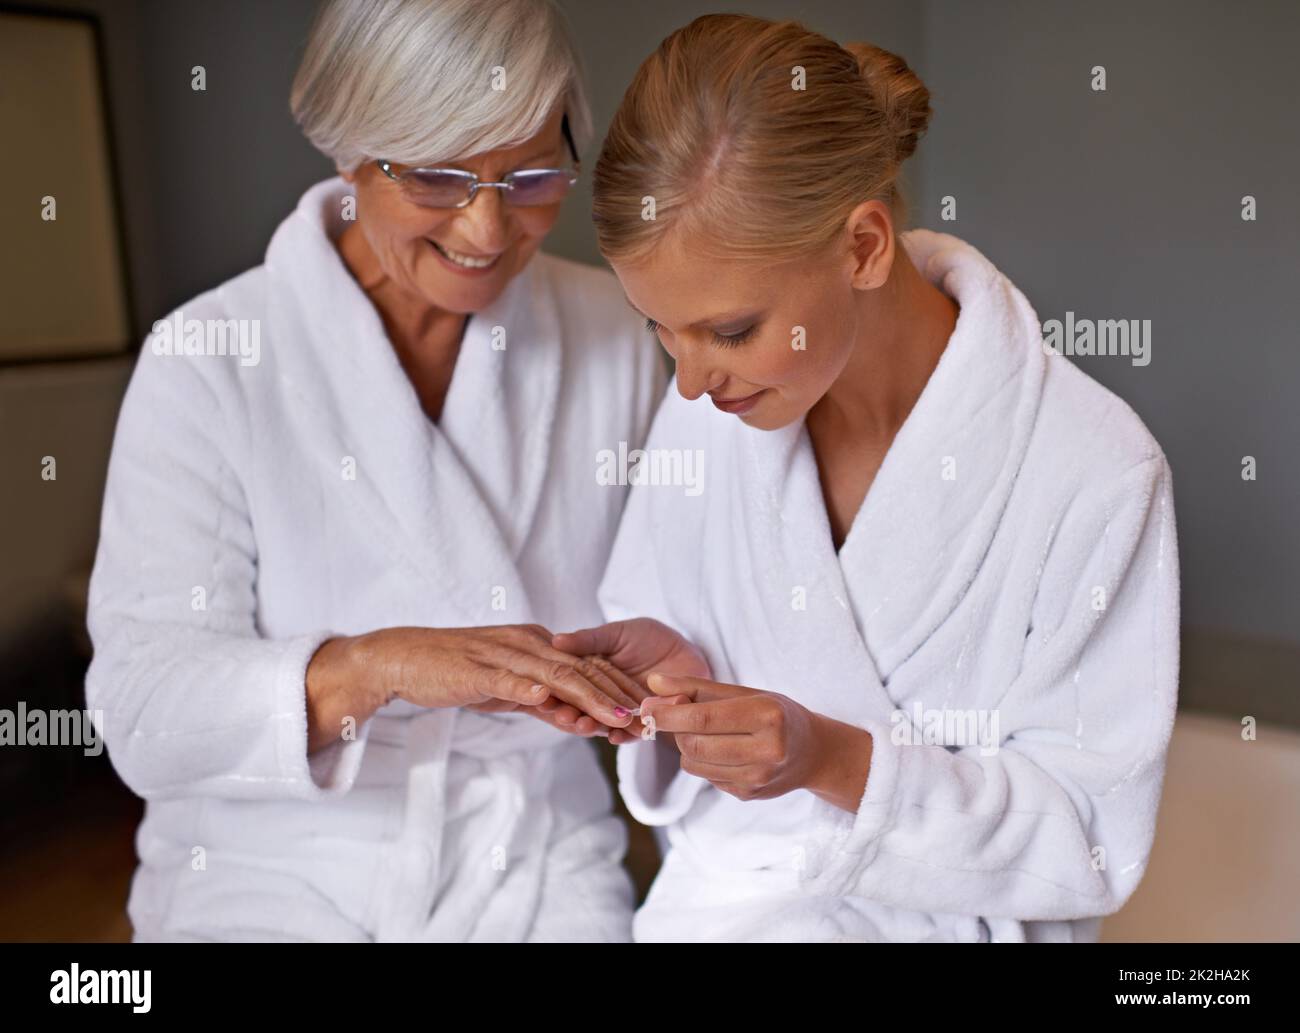 Making sure that her nails are perfect. Granddaughter paints her grandmothers nails. Stock Photo